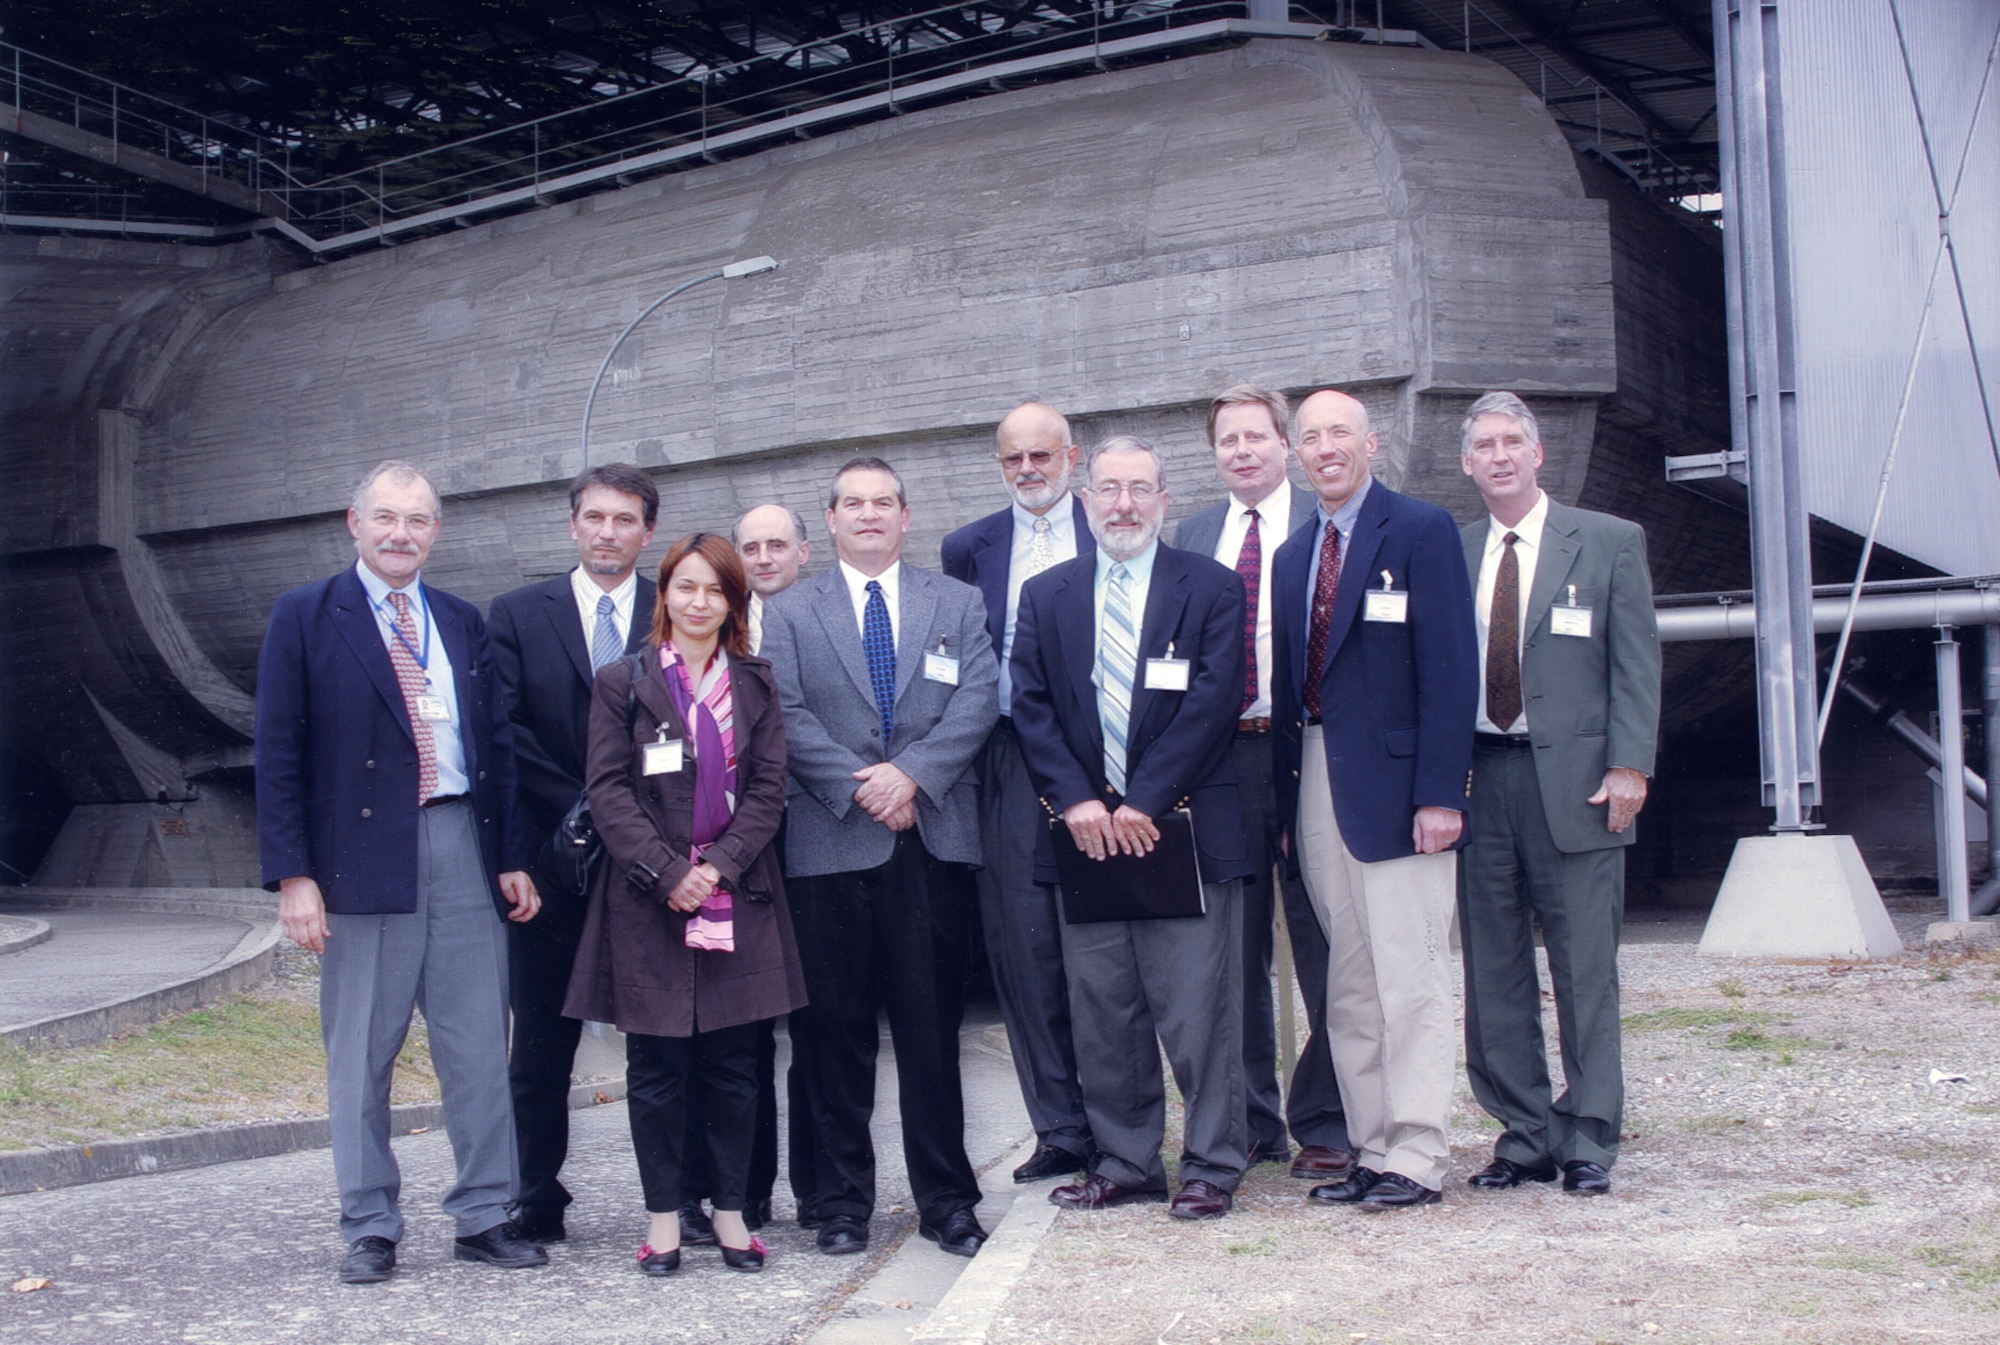 From left to right:  Philippe Desplas (ONERA), Patrick Natali (France DGA), Elisabeth Brindou (France General Delegation for Ordnance), Jean-Pierre Foucalt (ONERA), AEDC’s Charlie Vining, Jack Walters and Tom Best and Mike George (NASA), then AEDC Commander Col. Art Huber and Tim Marshall (NASA) gathered for a group photo when the team from AEDC paid their first visit to ONERA (Office National d’Etudes et Recherches Aérospatiales), the French national aerospace research center. The DGA is the French government agency that conducts development and evaluations for weapon systems for the French military. (Photo provided)